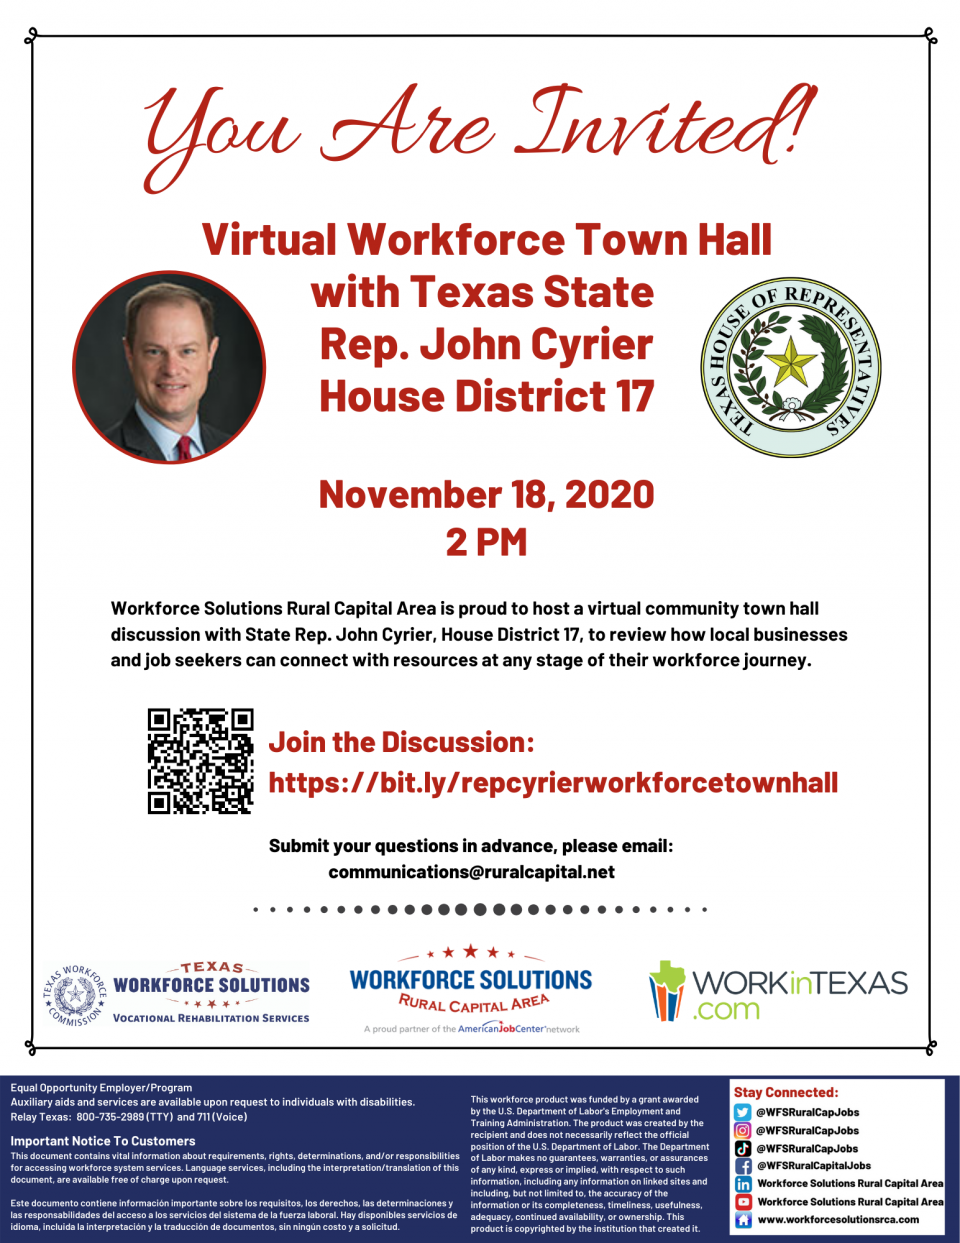 Join the Discussion: Virtual Workforce Town Hall with State Rep. John Cyrier, House District 17